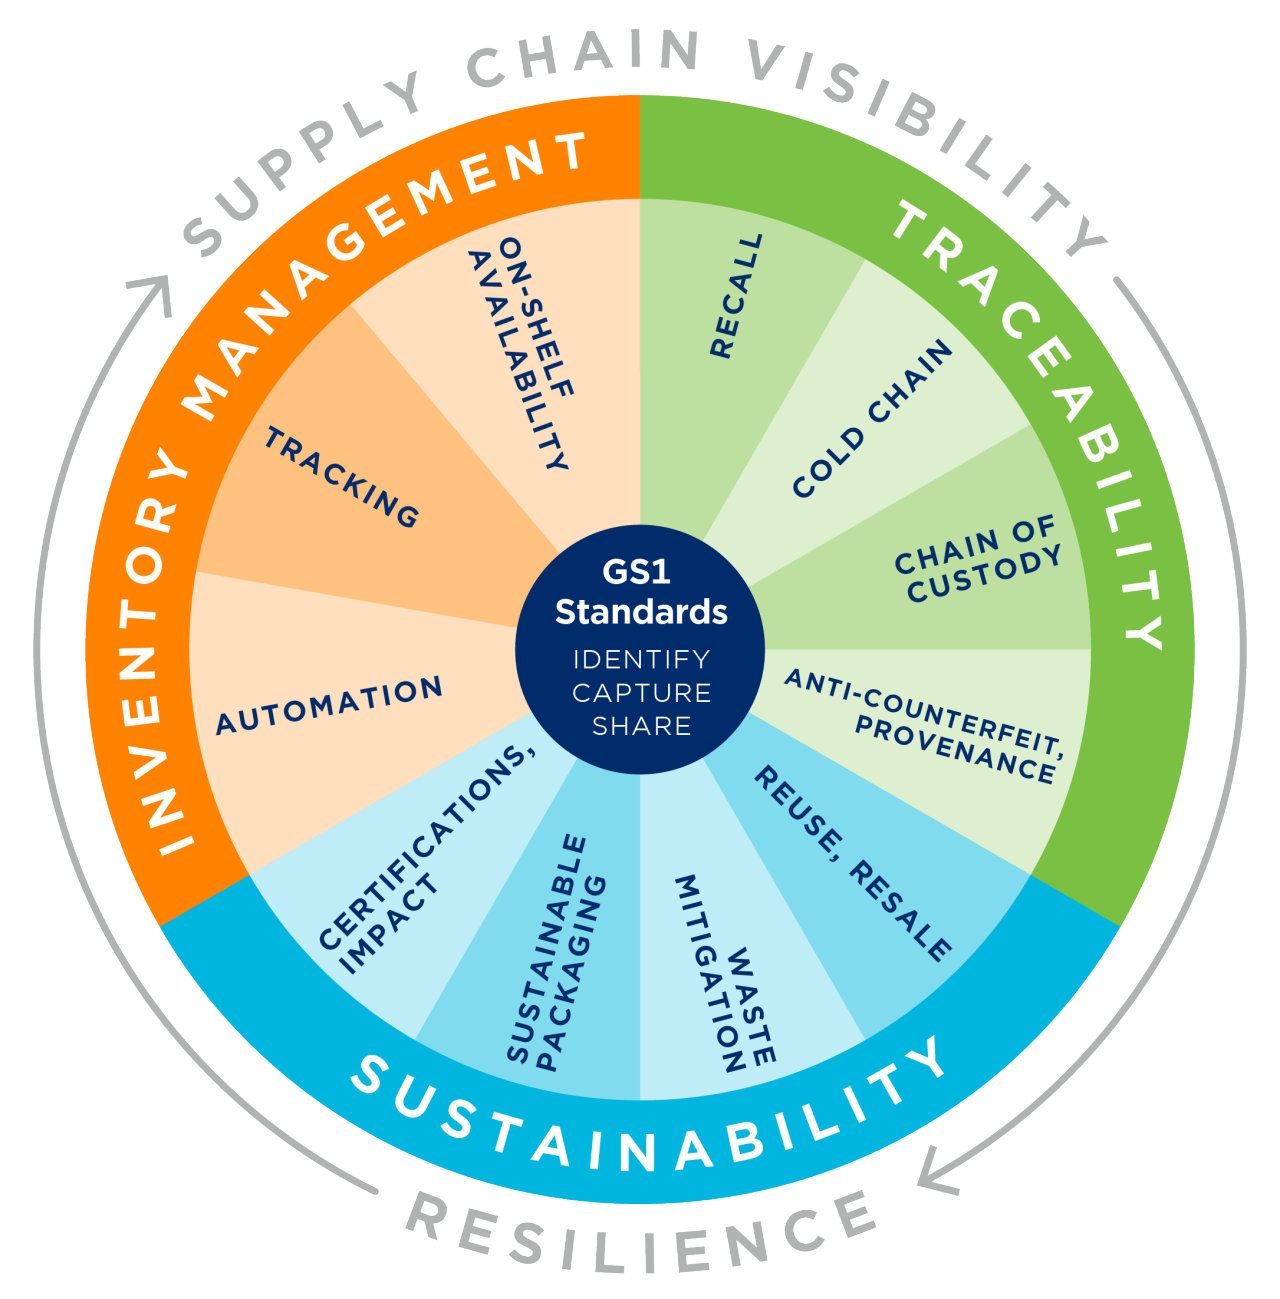 Understanding the Full Supply Chain Picture